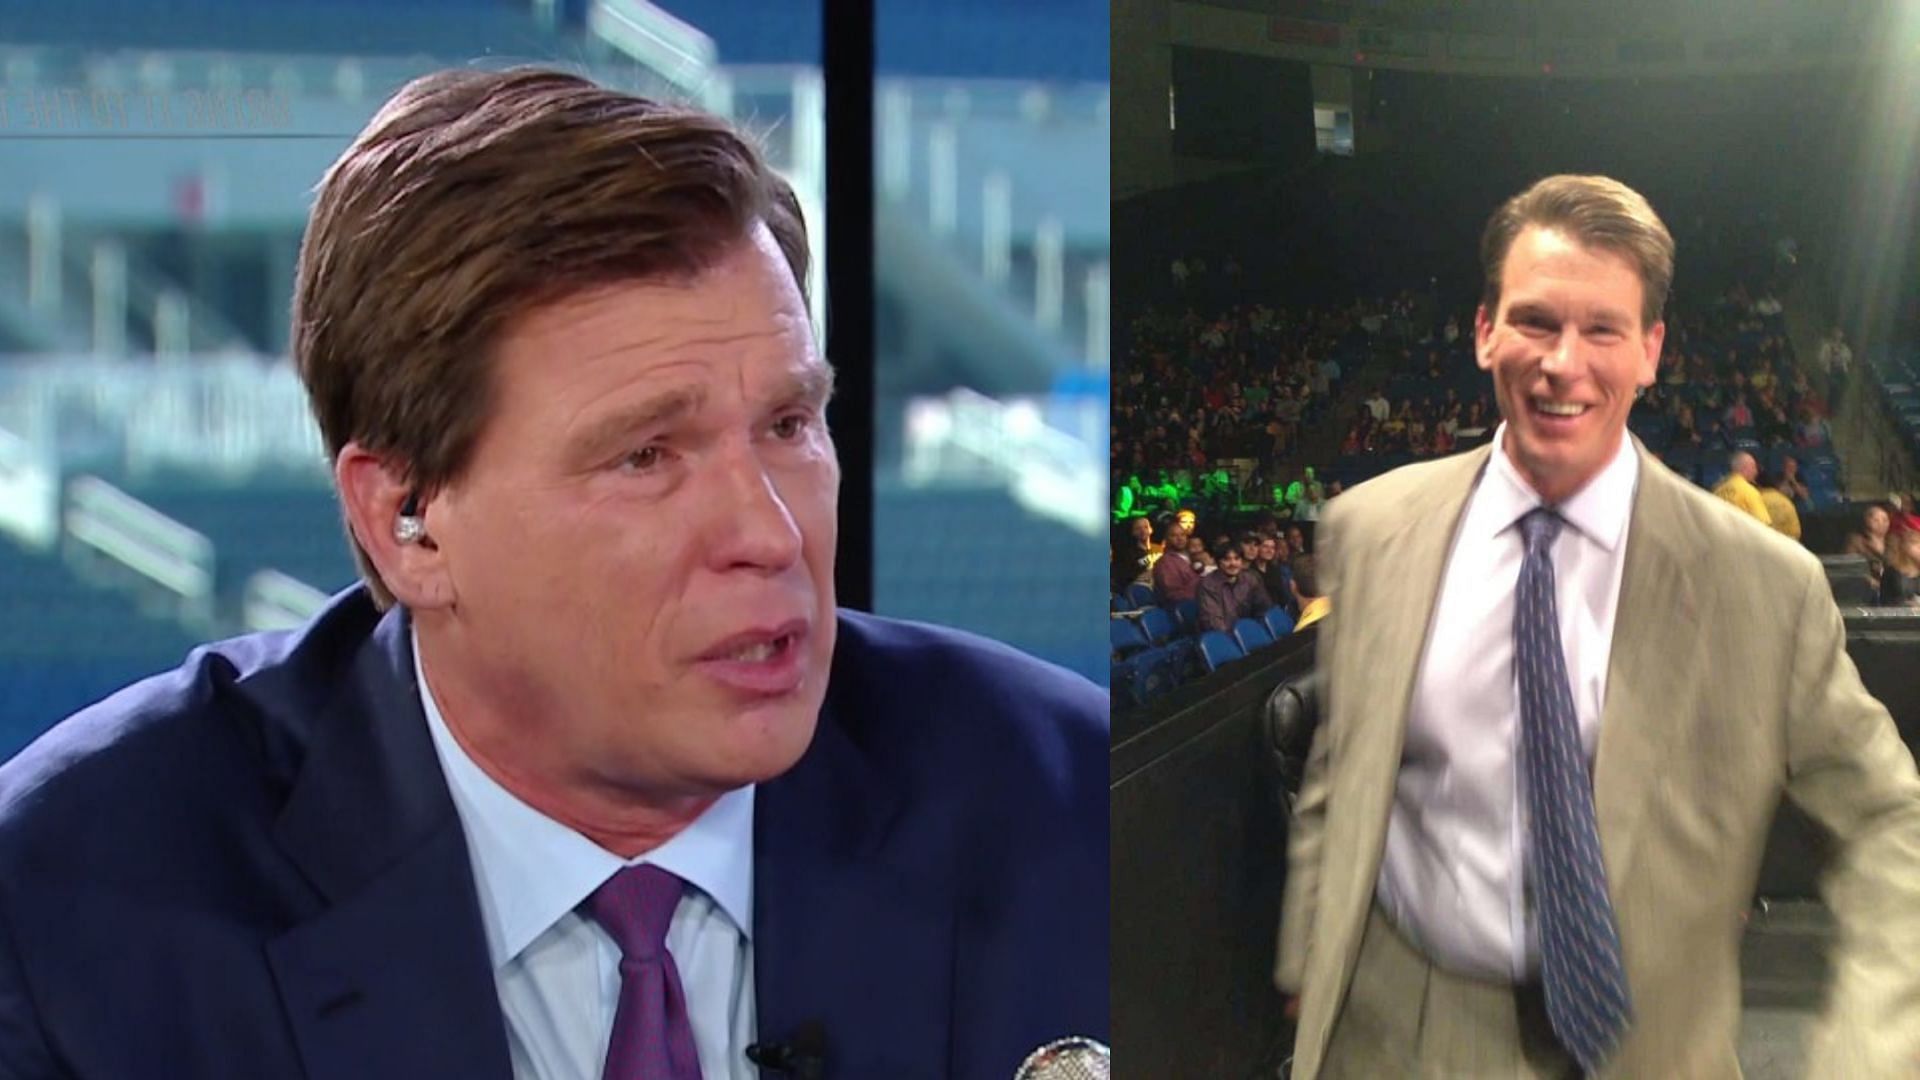 JBL has a lot of experience in the wrestling industry